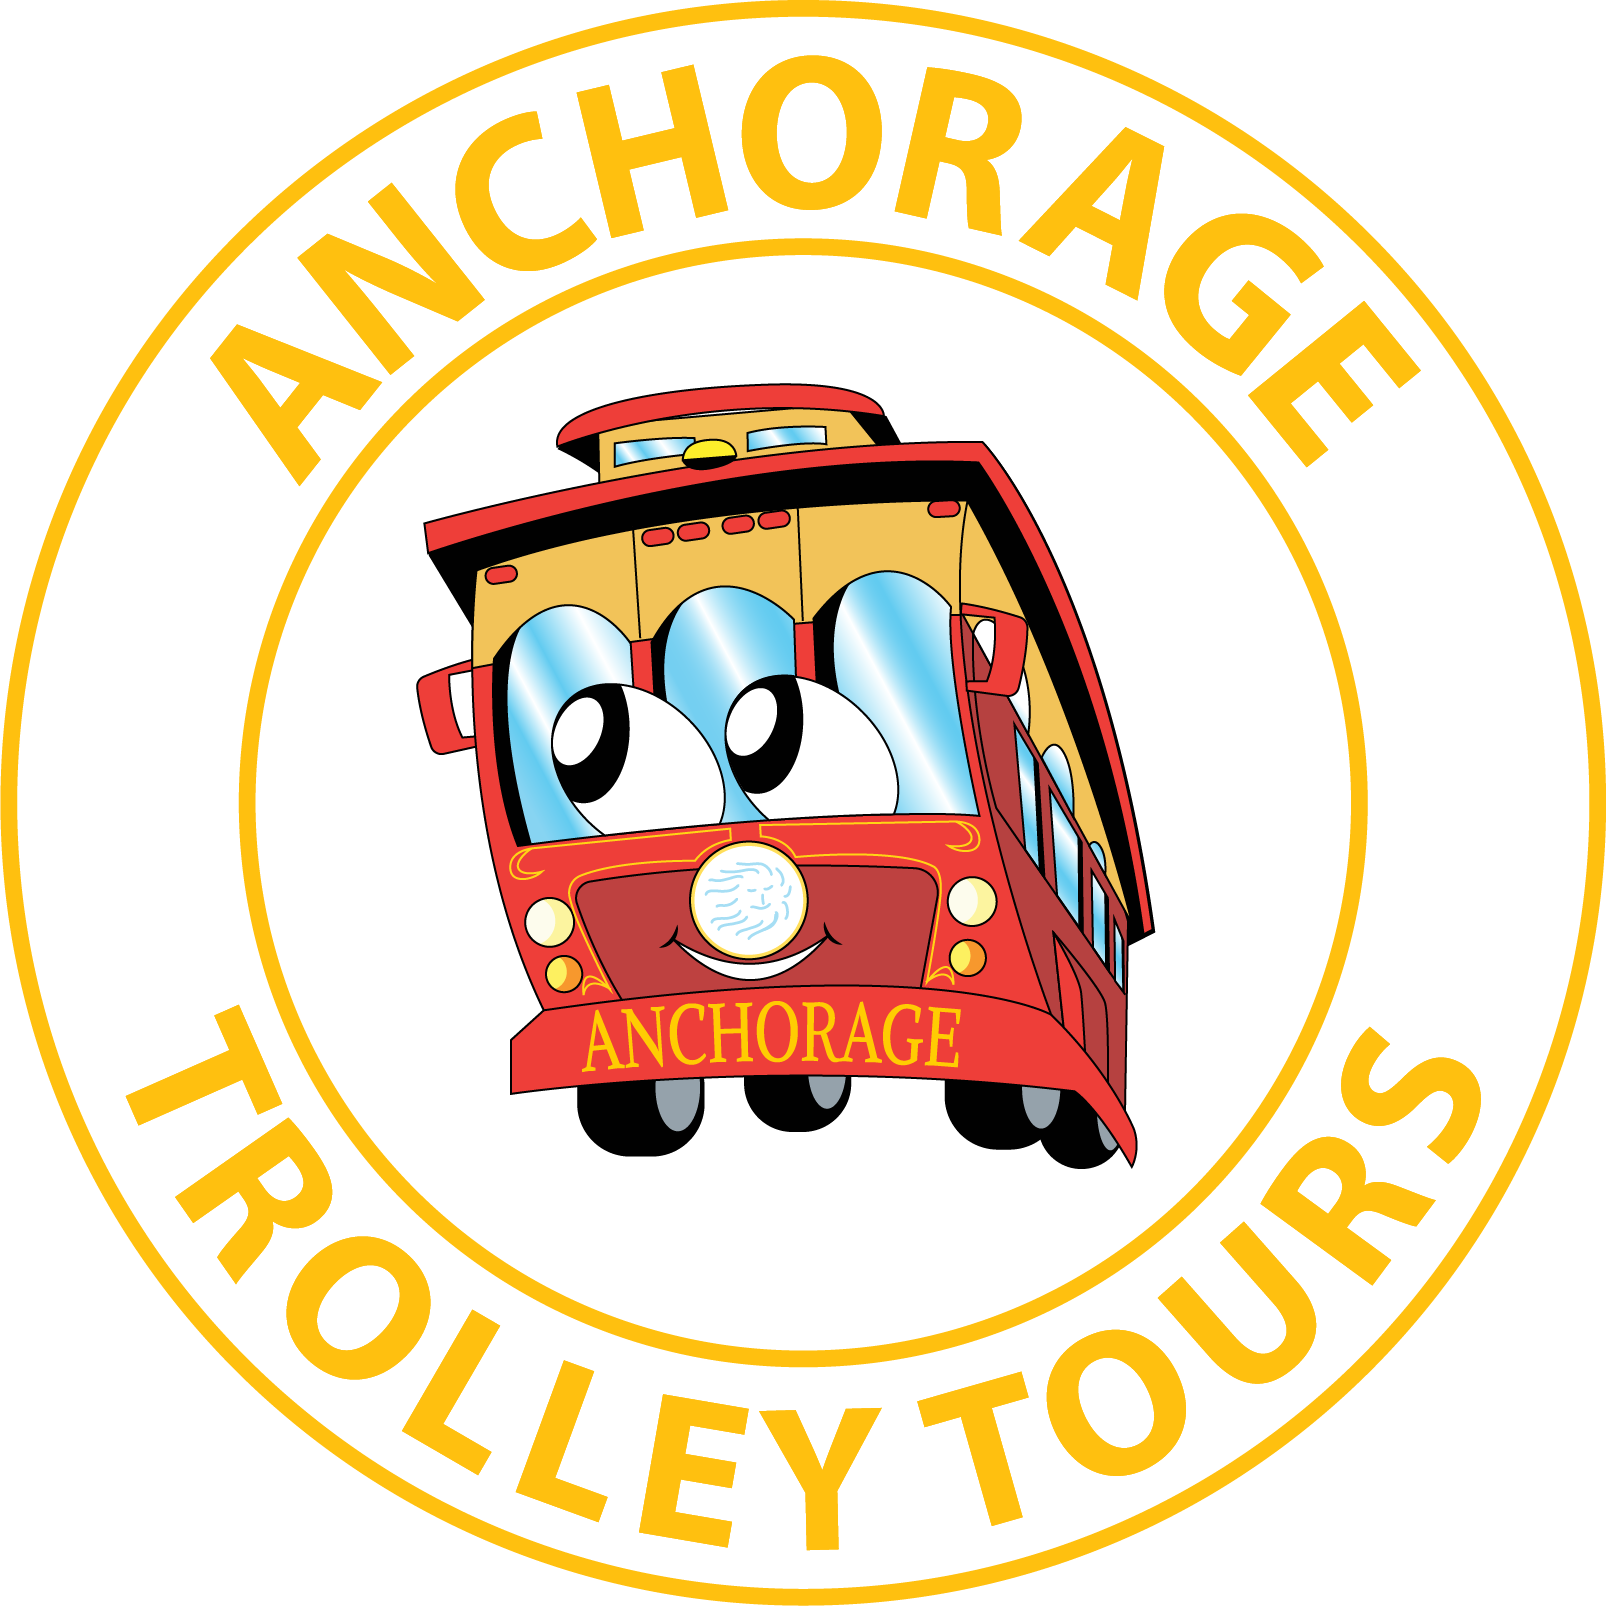 tour in anchorage